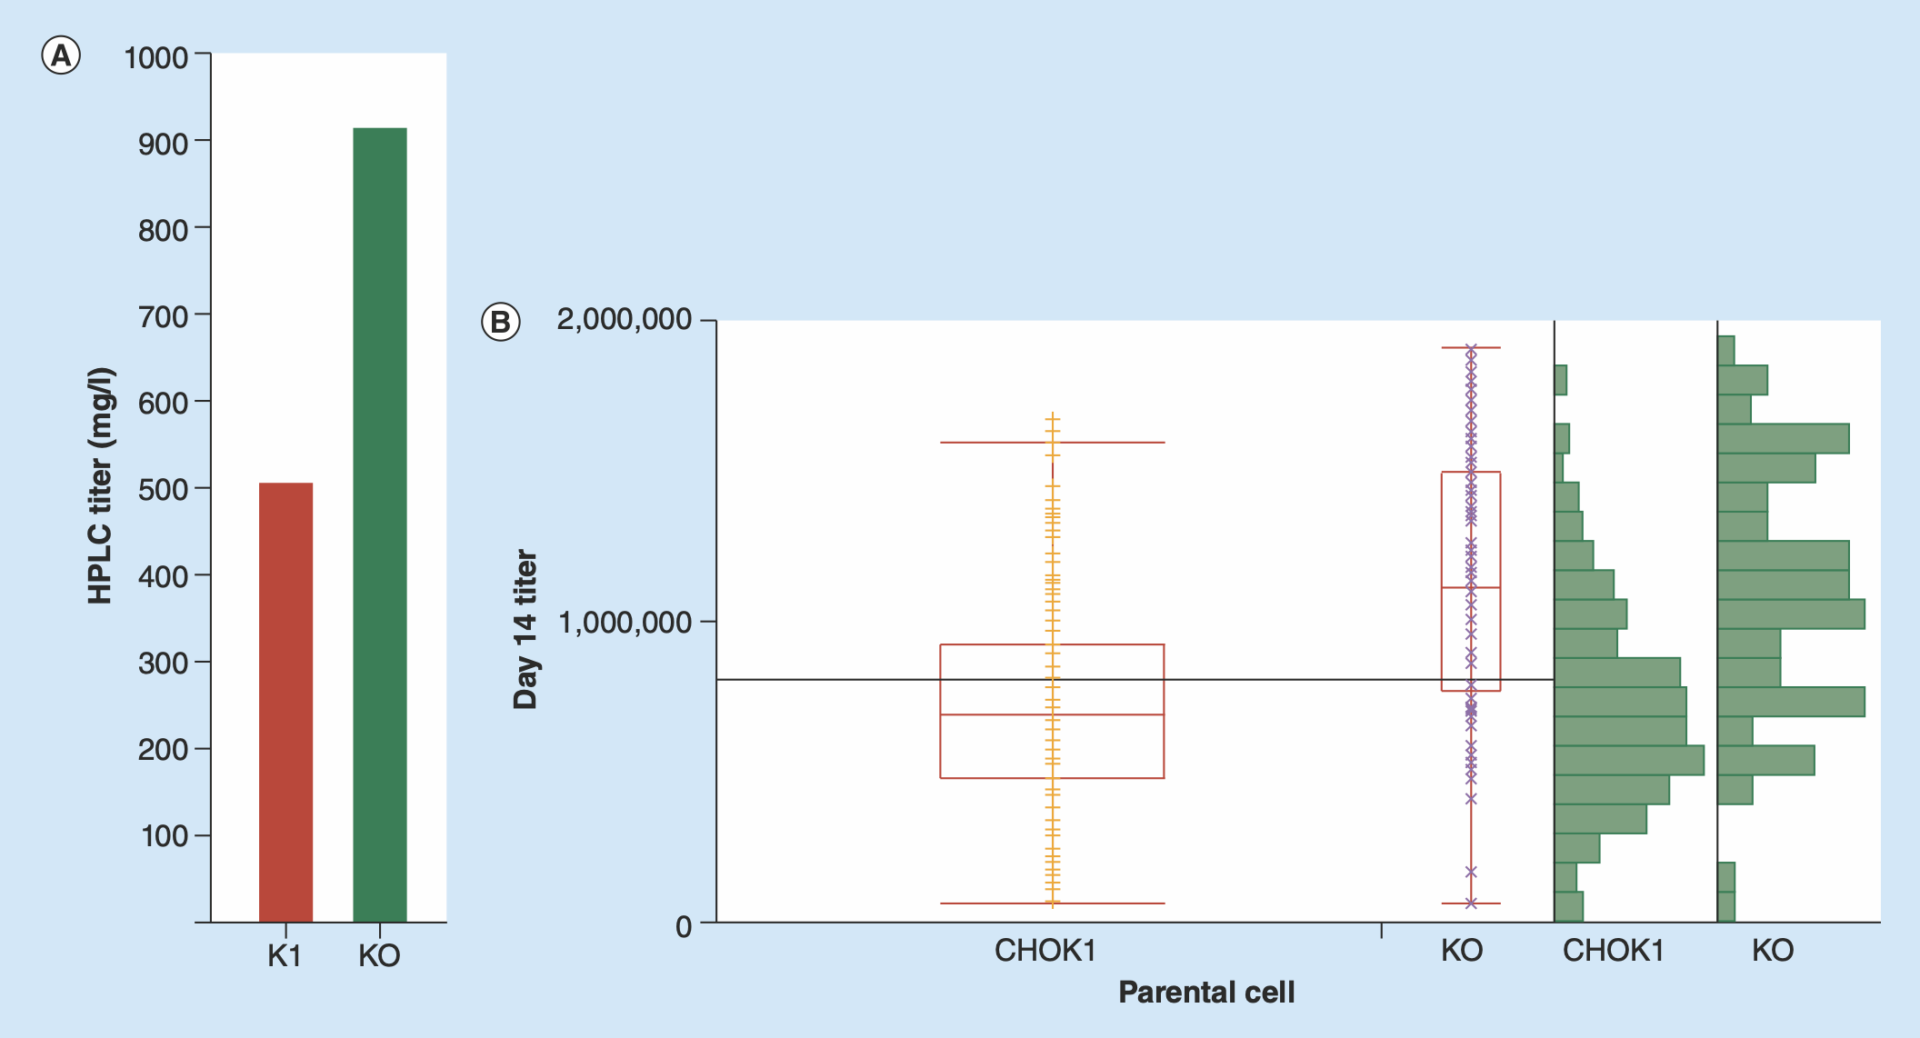 Comparison of selected bulk cultures between CHOK1SV and GS-KO cells